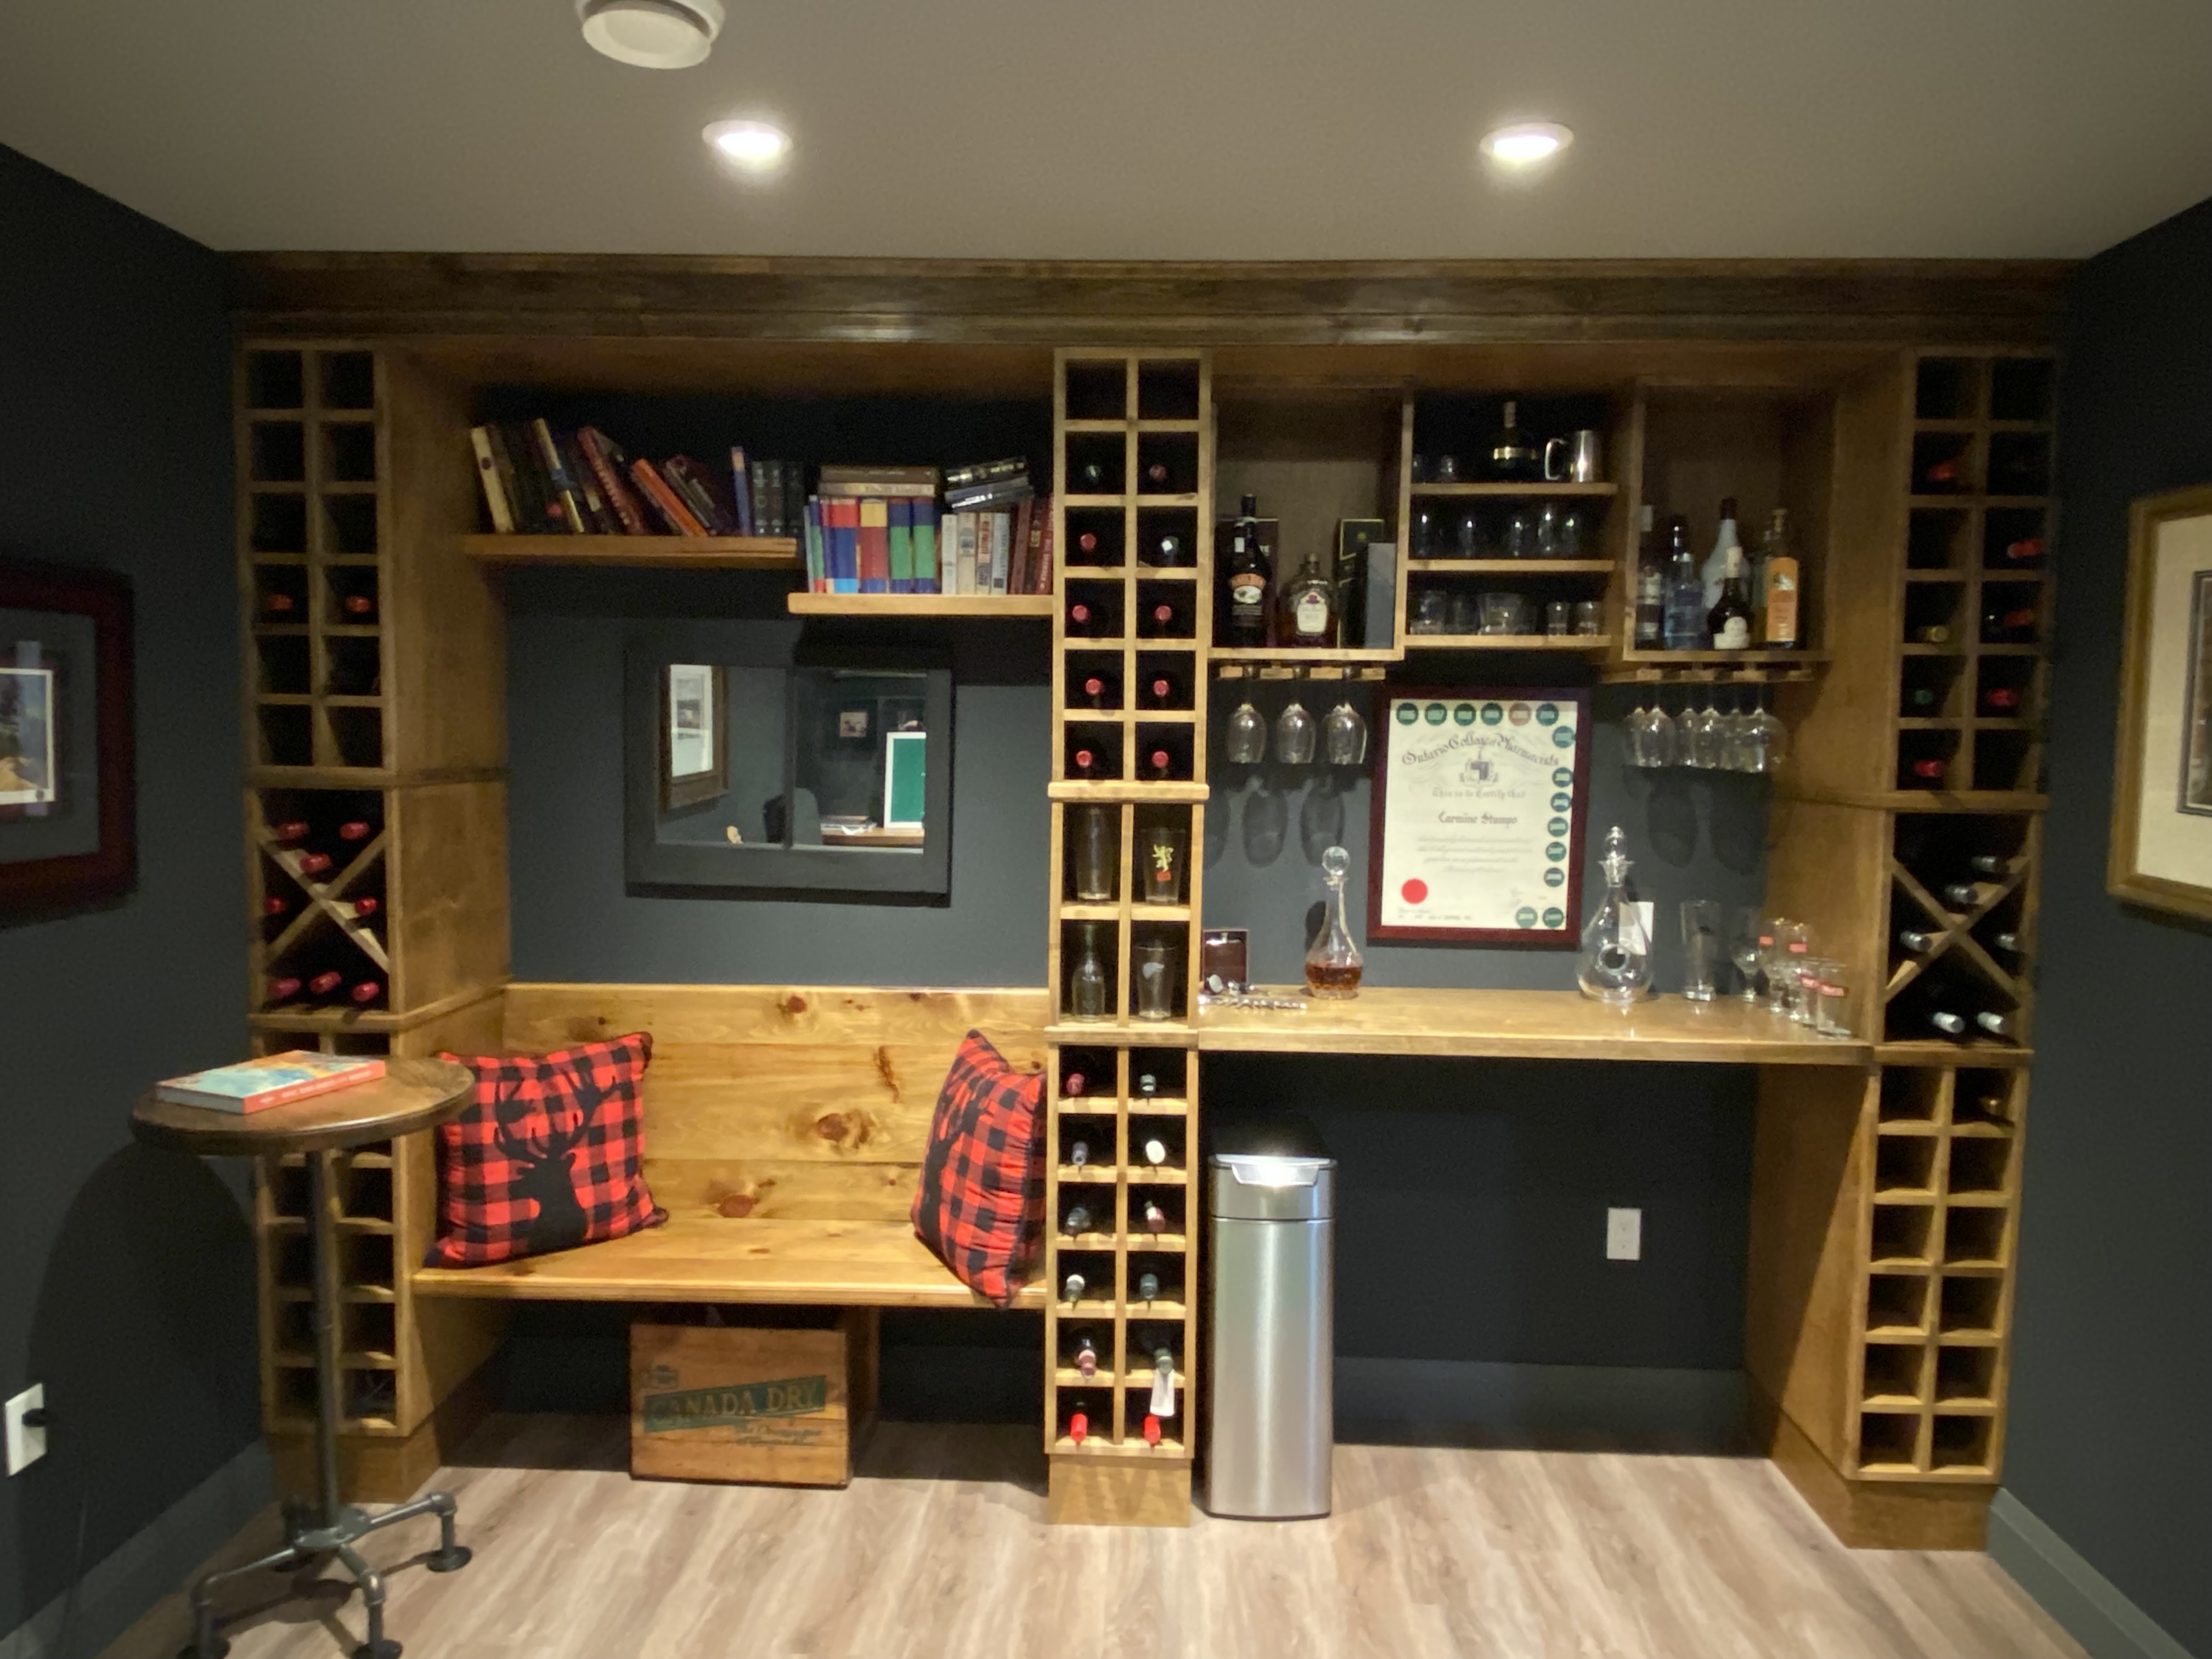 carmine's home office, showcasing his woodworking skills (wine rack and bench)